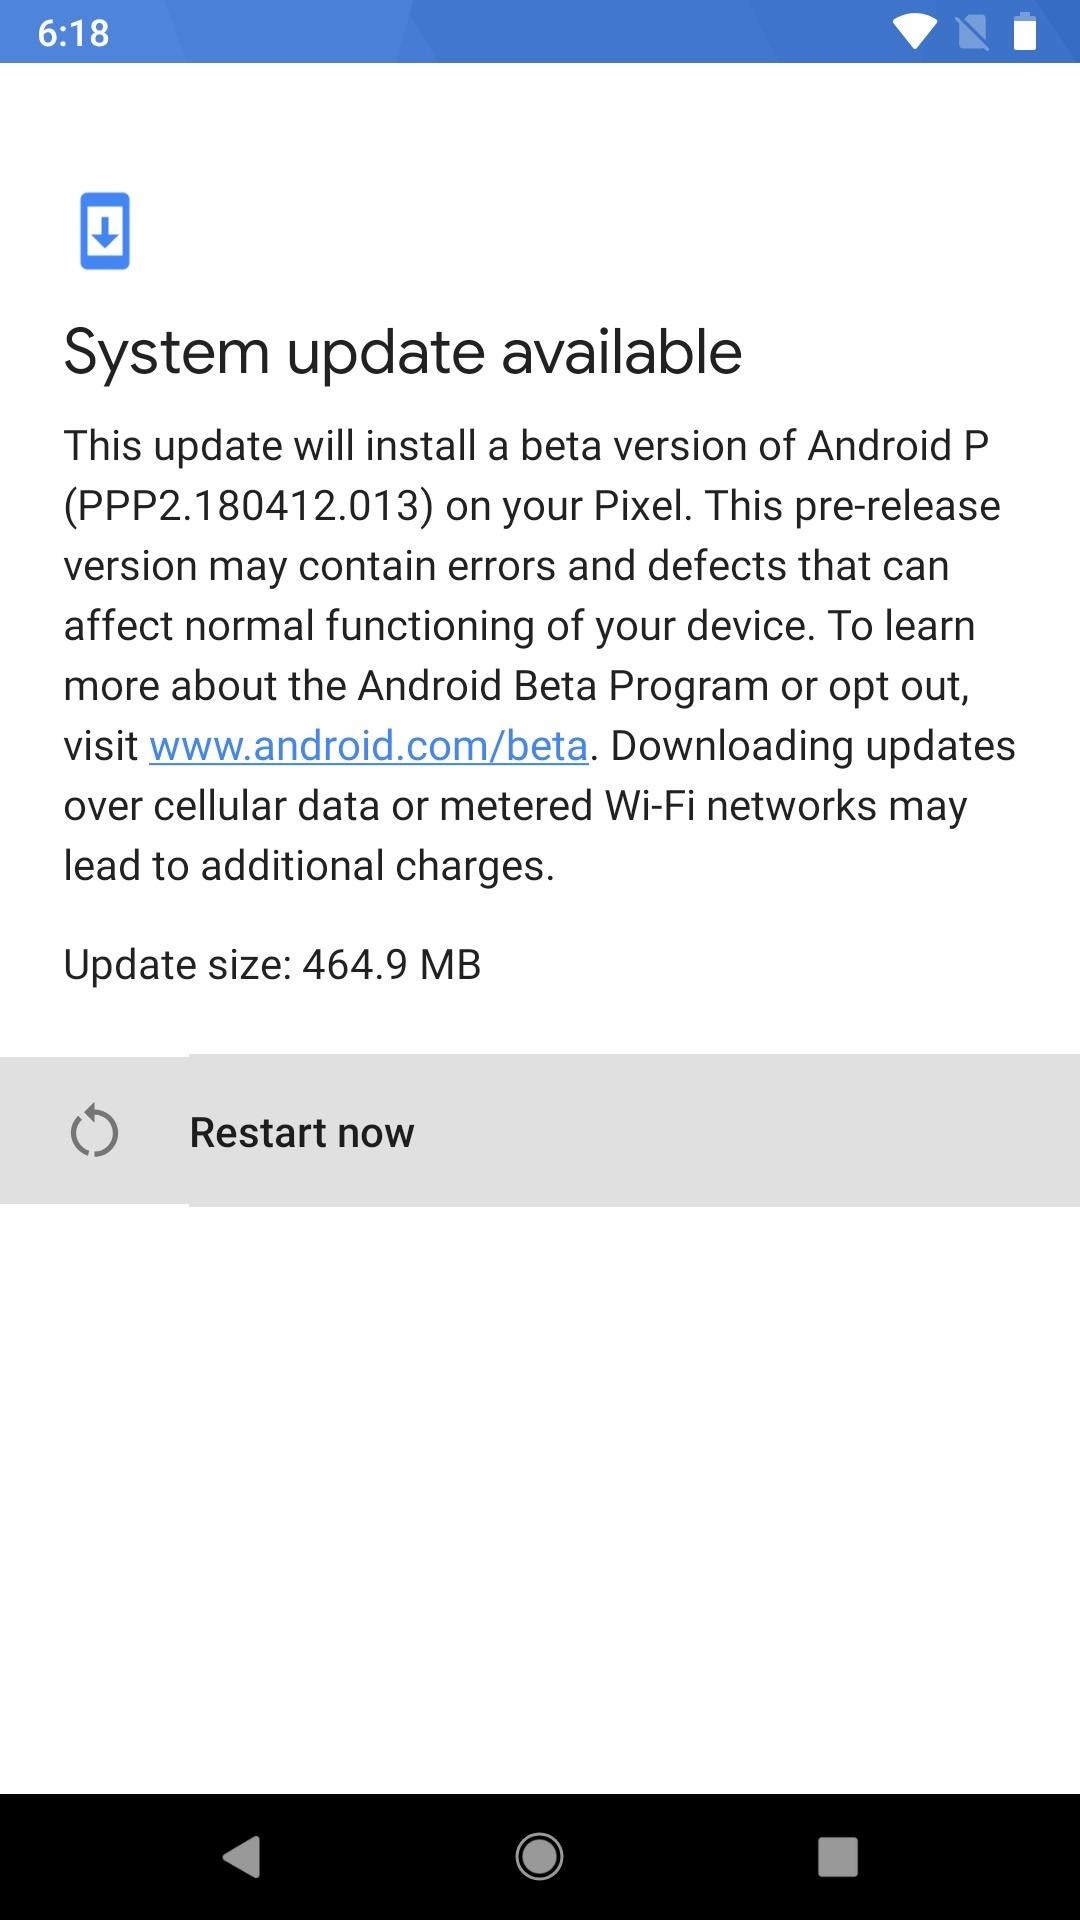 How to Install Android 9.0 Pie Beta on Your Google Pixel or Pixel 2 Right Now